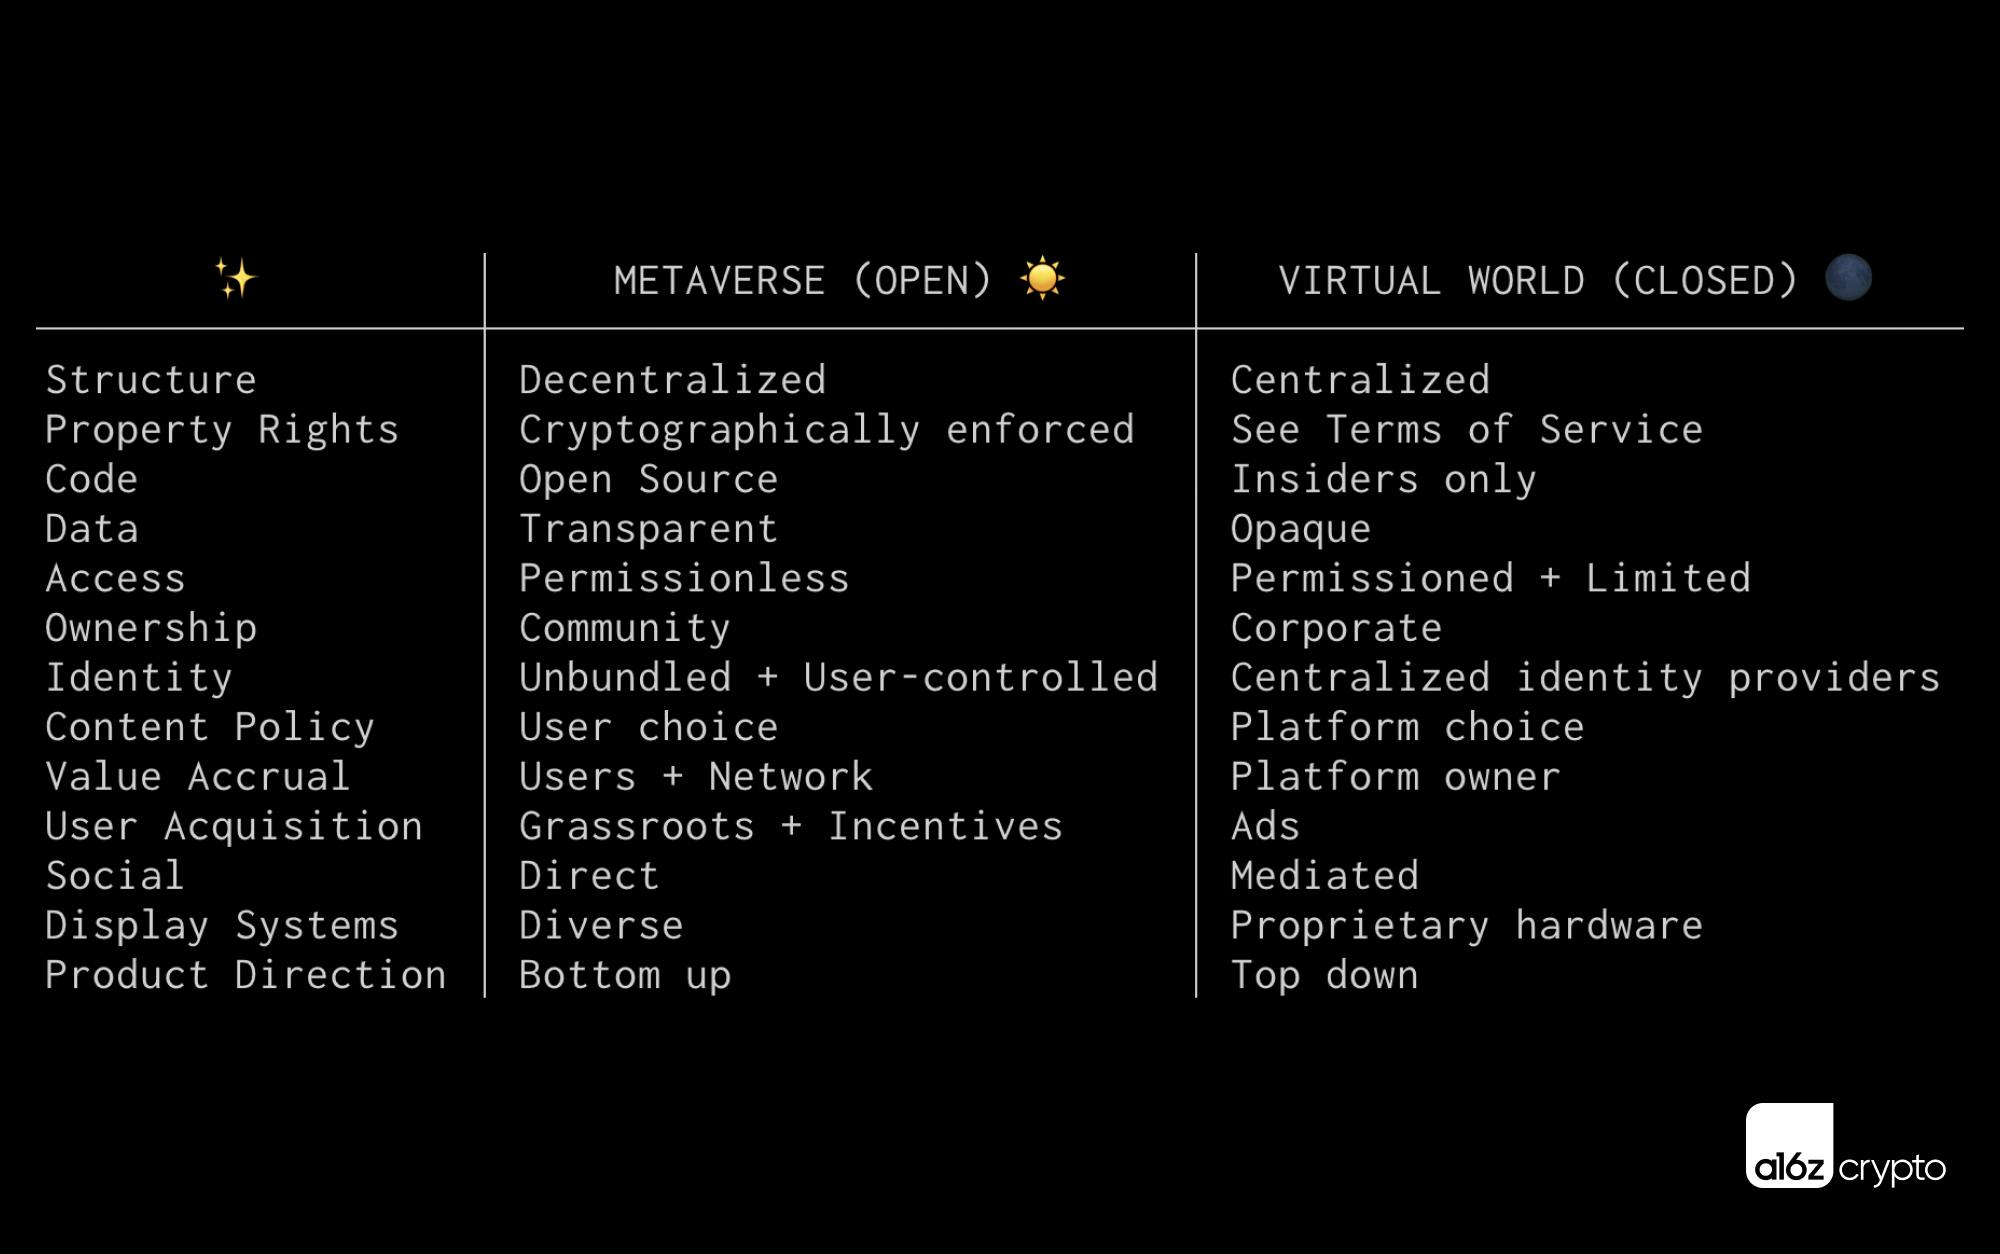 Image of comparison between an Open Metaverse and the Closed Metaverse companies are building